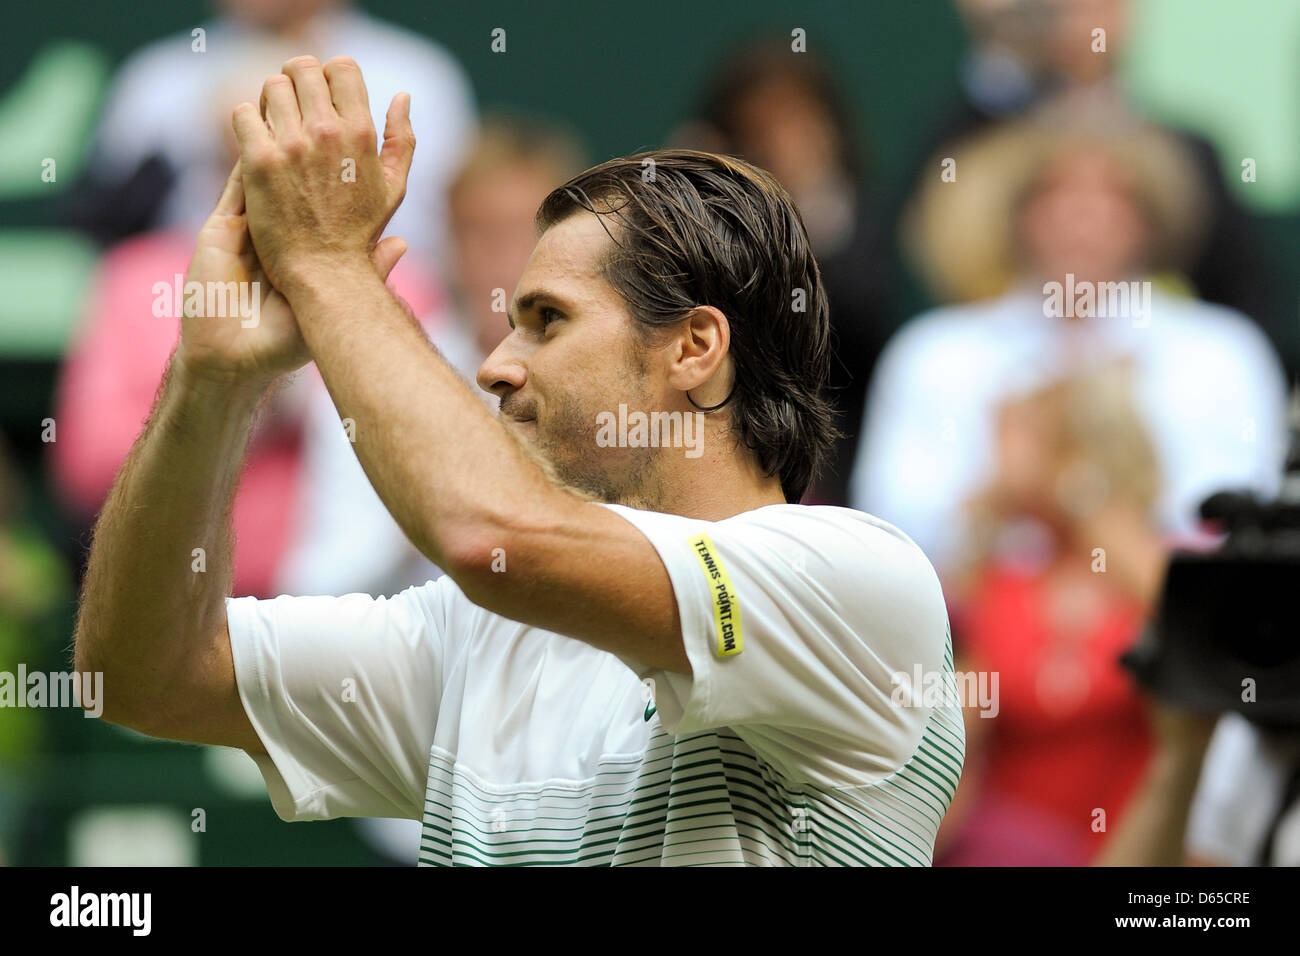 German tennis player Tommy Haas celebrates after winning the final of the Gerry Weber Open against Federer from Switzerland in Halle/Westfalen, Germany, 17 June 2012. Haas bet Federer 7:6 and 6:4 in two sets. Photo: CHRISTIAN WEISCHE Stock Photo